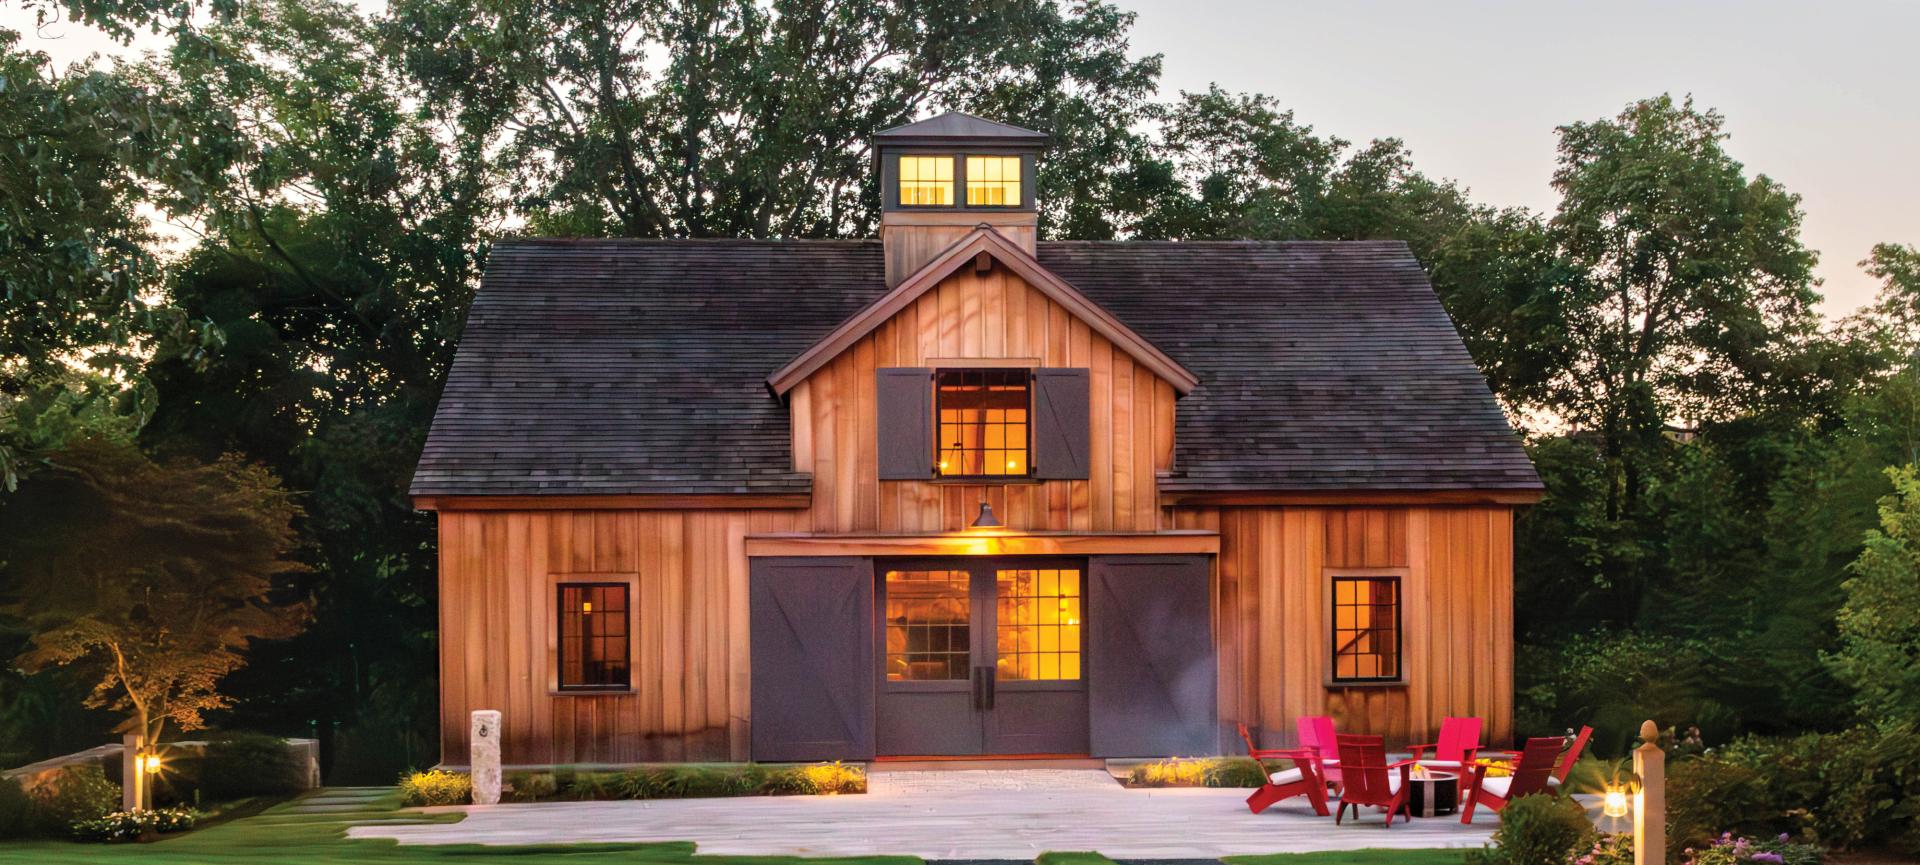 Timber Frame Barn Style Home by Patrick Ahearn Architect and New Energy Works